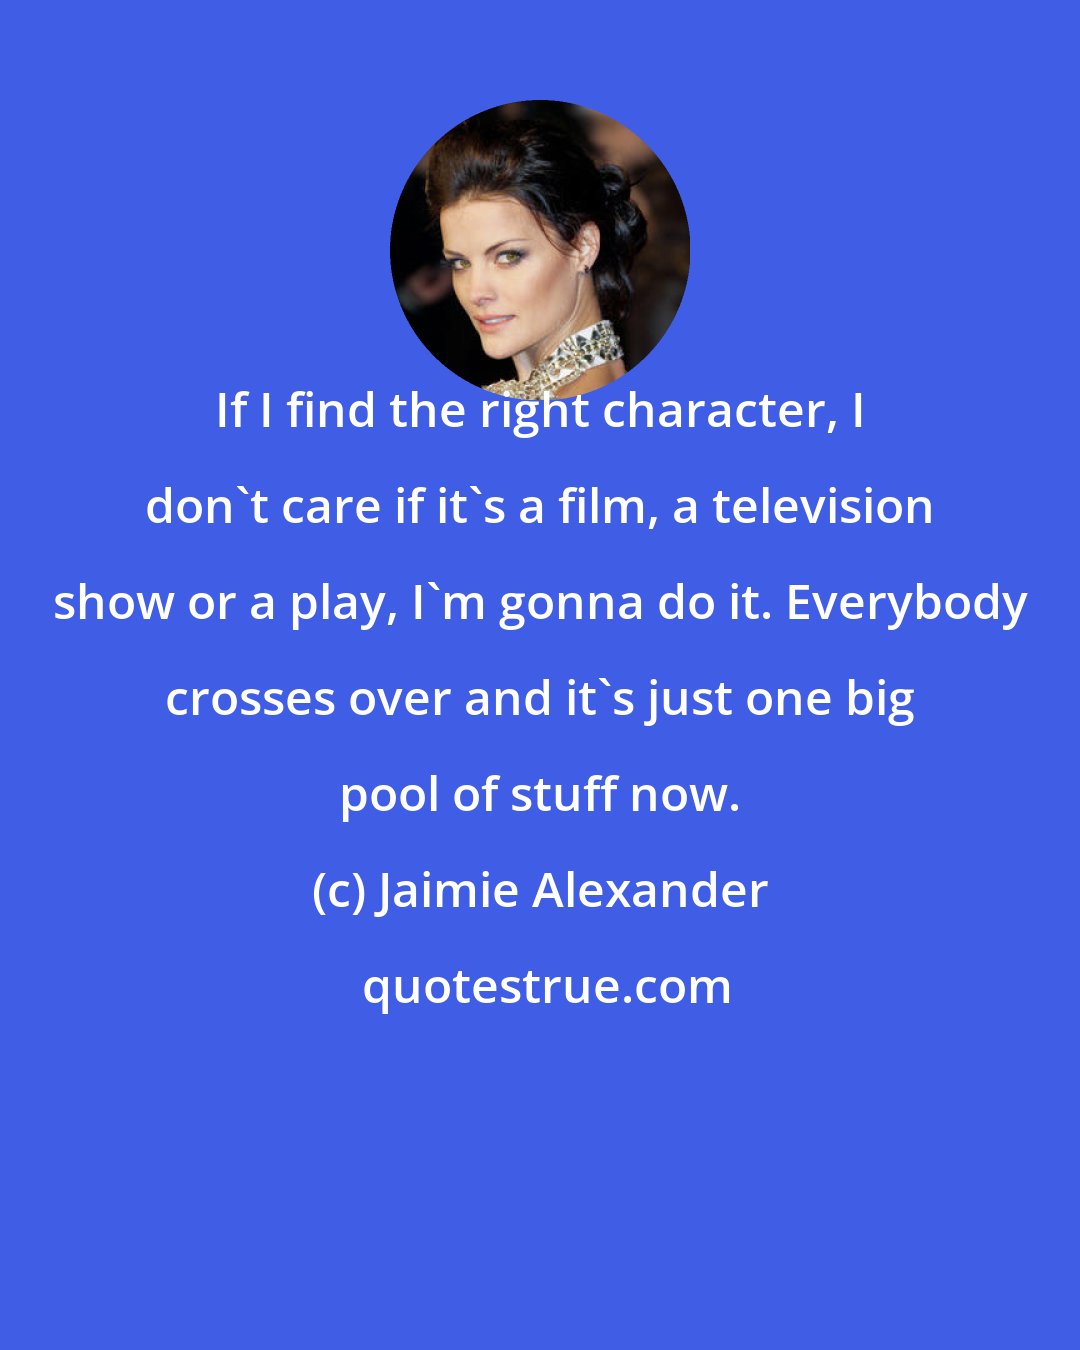 Jaimie Alexander: If I find the right character, I don't care if it's a film, a television show or a play, I'm gonna do it. Everybody crosses over and it's just one big pool of stuff now.